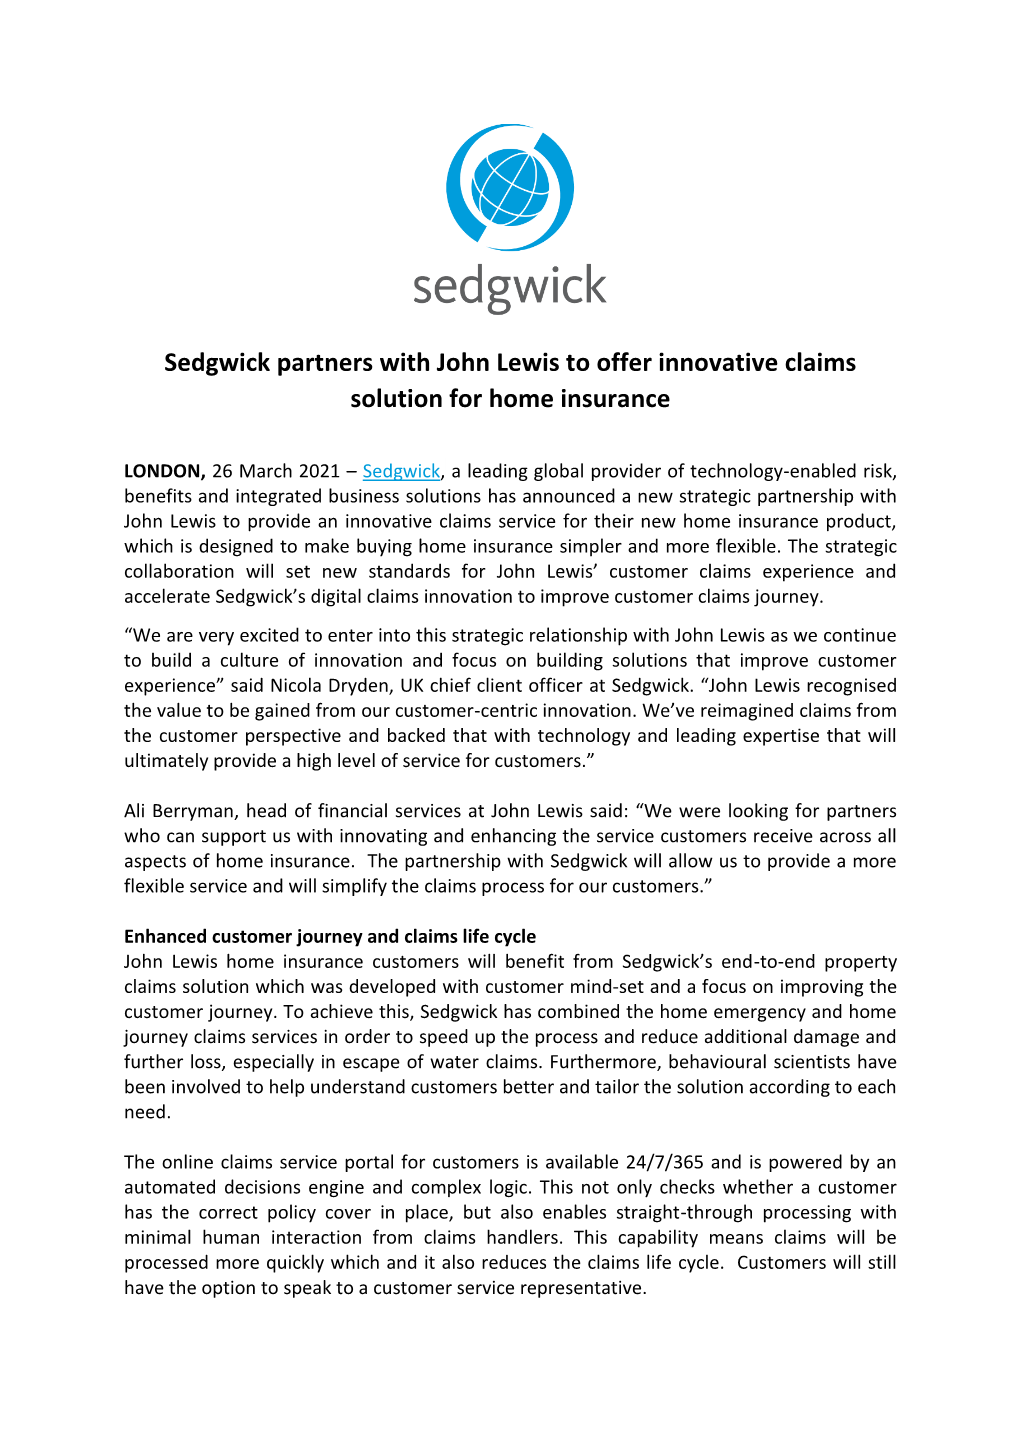 Sedgwick Partners with John Lewis to Offer Innovative Claims Solution for Home Insurance